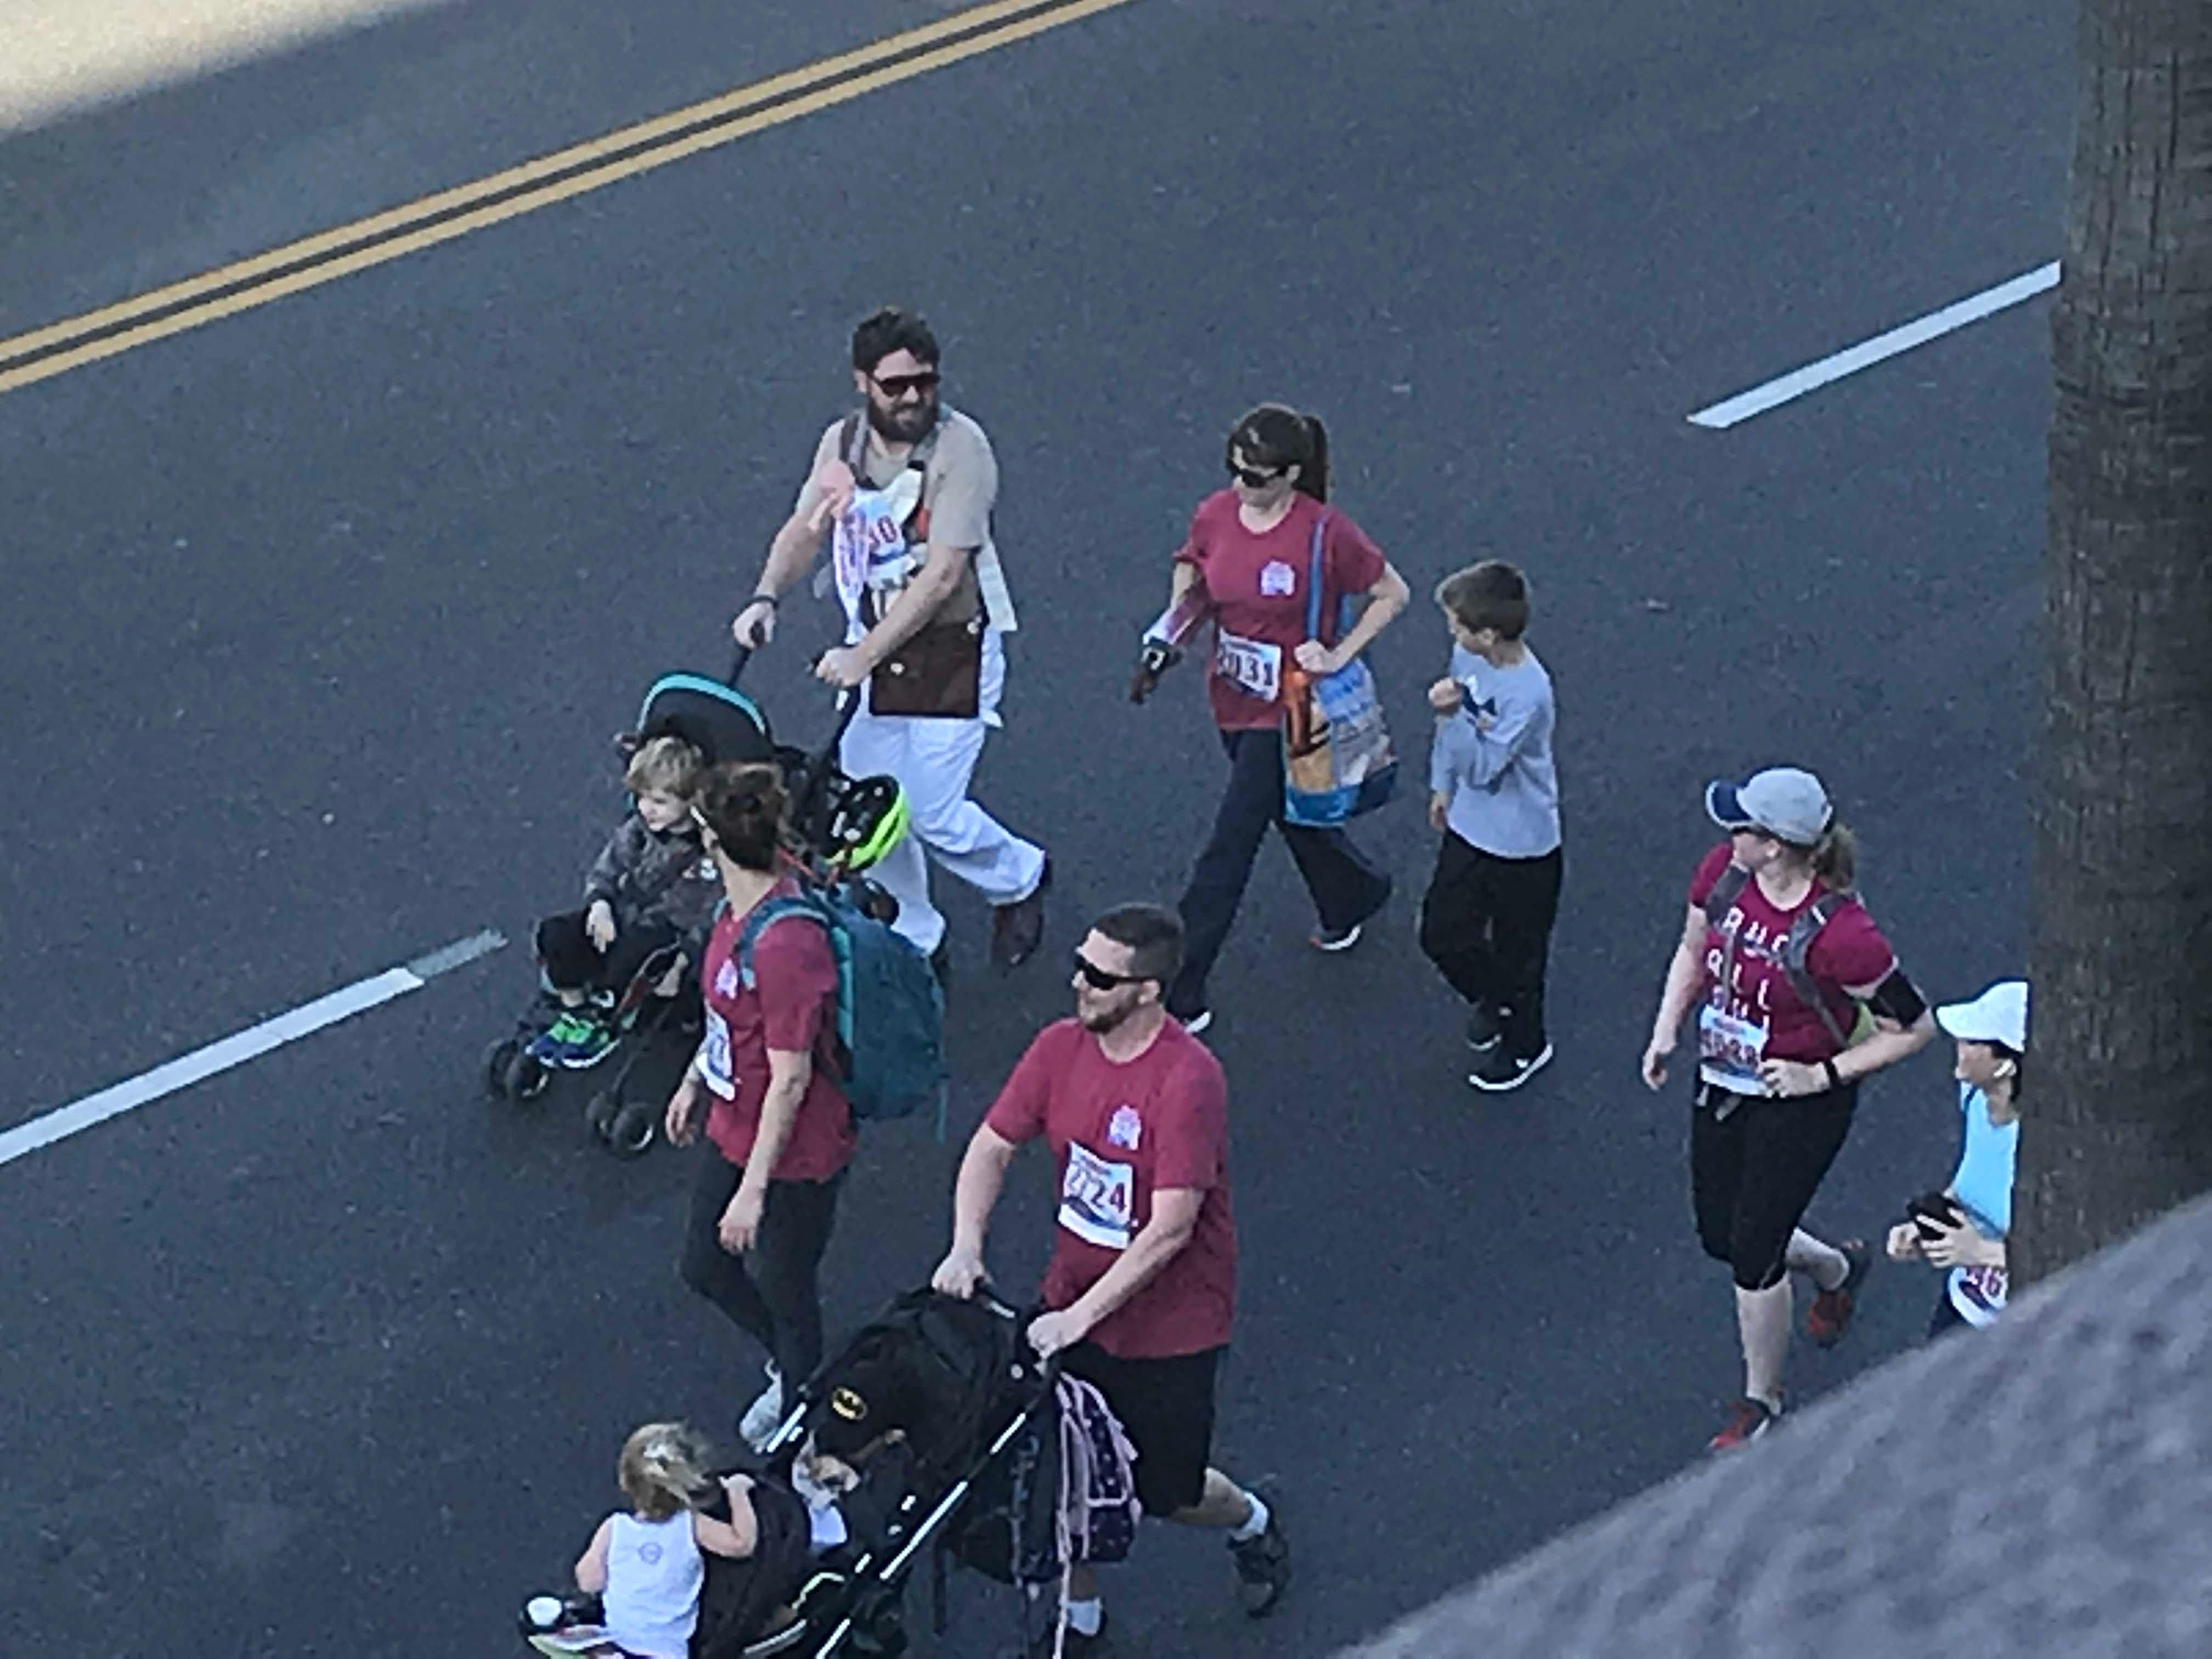 Looks like Alan beat the hangover and made it to the 10k! Nailed it.